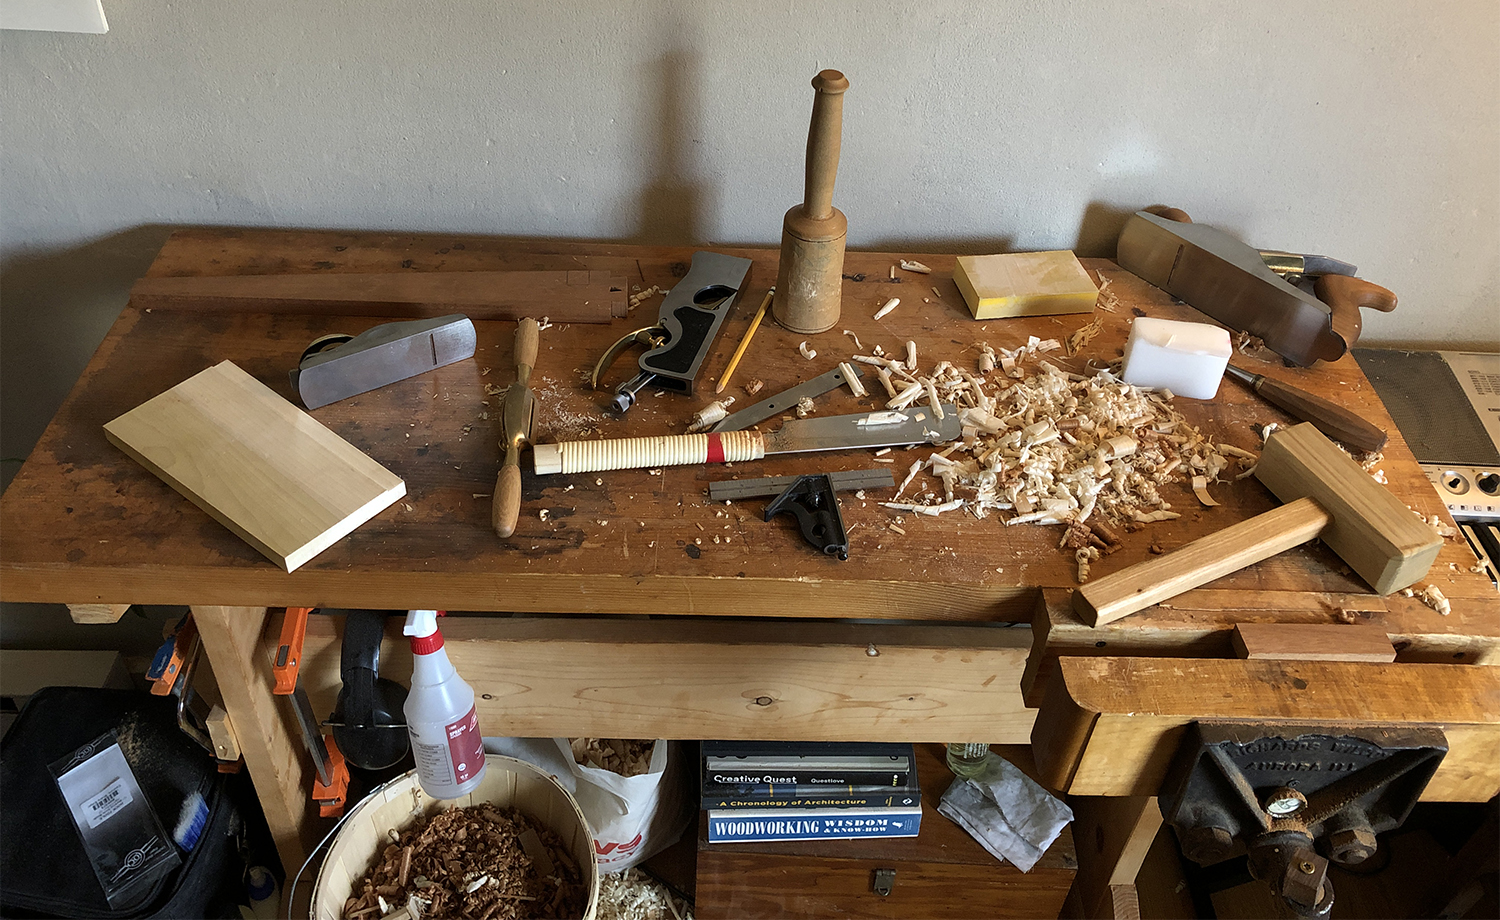 Charlie's home workbench